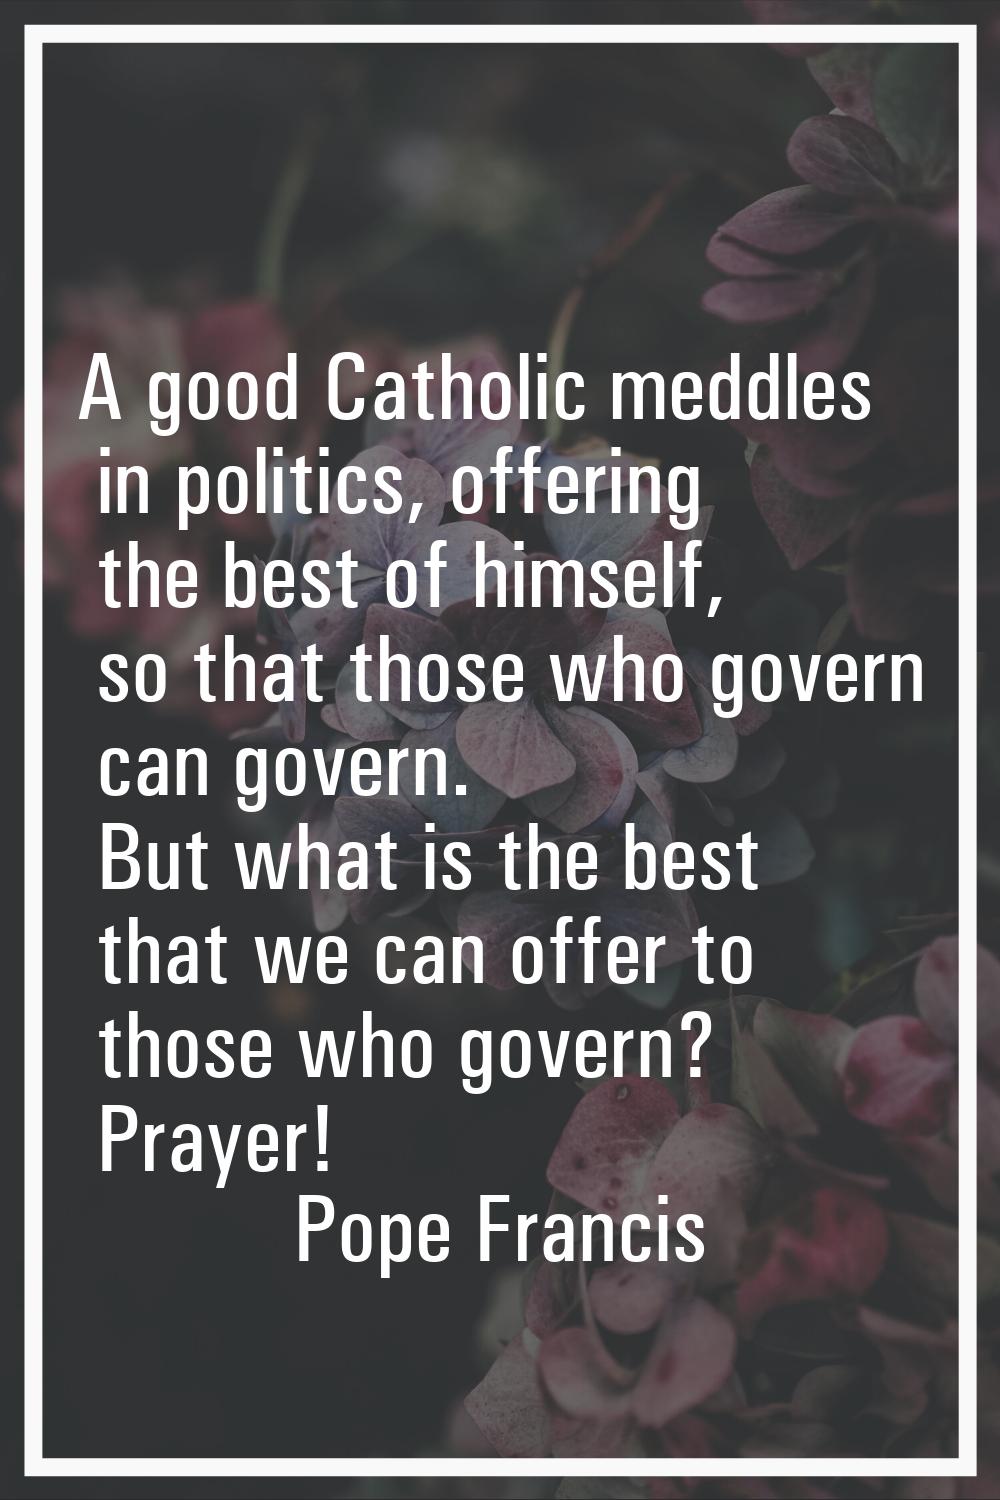 A good Catholic meddles in politics, offering the best of himself, so that those who govern can gov